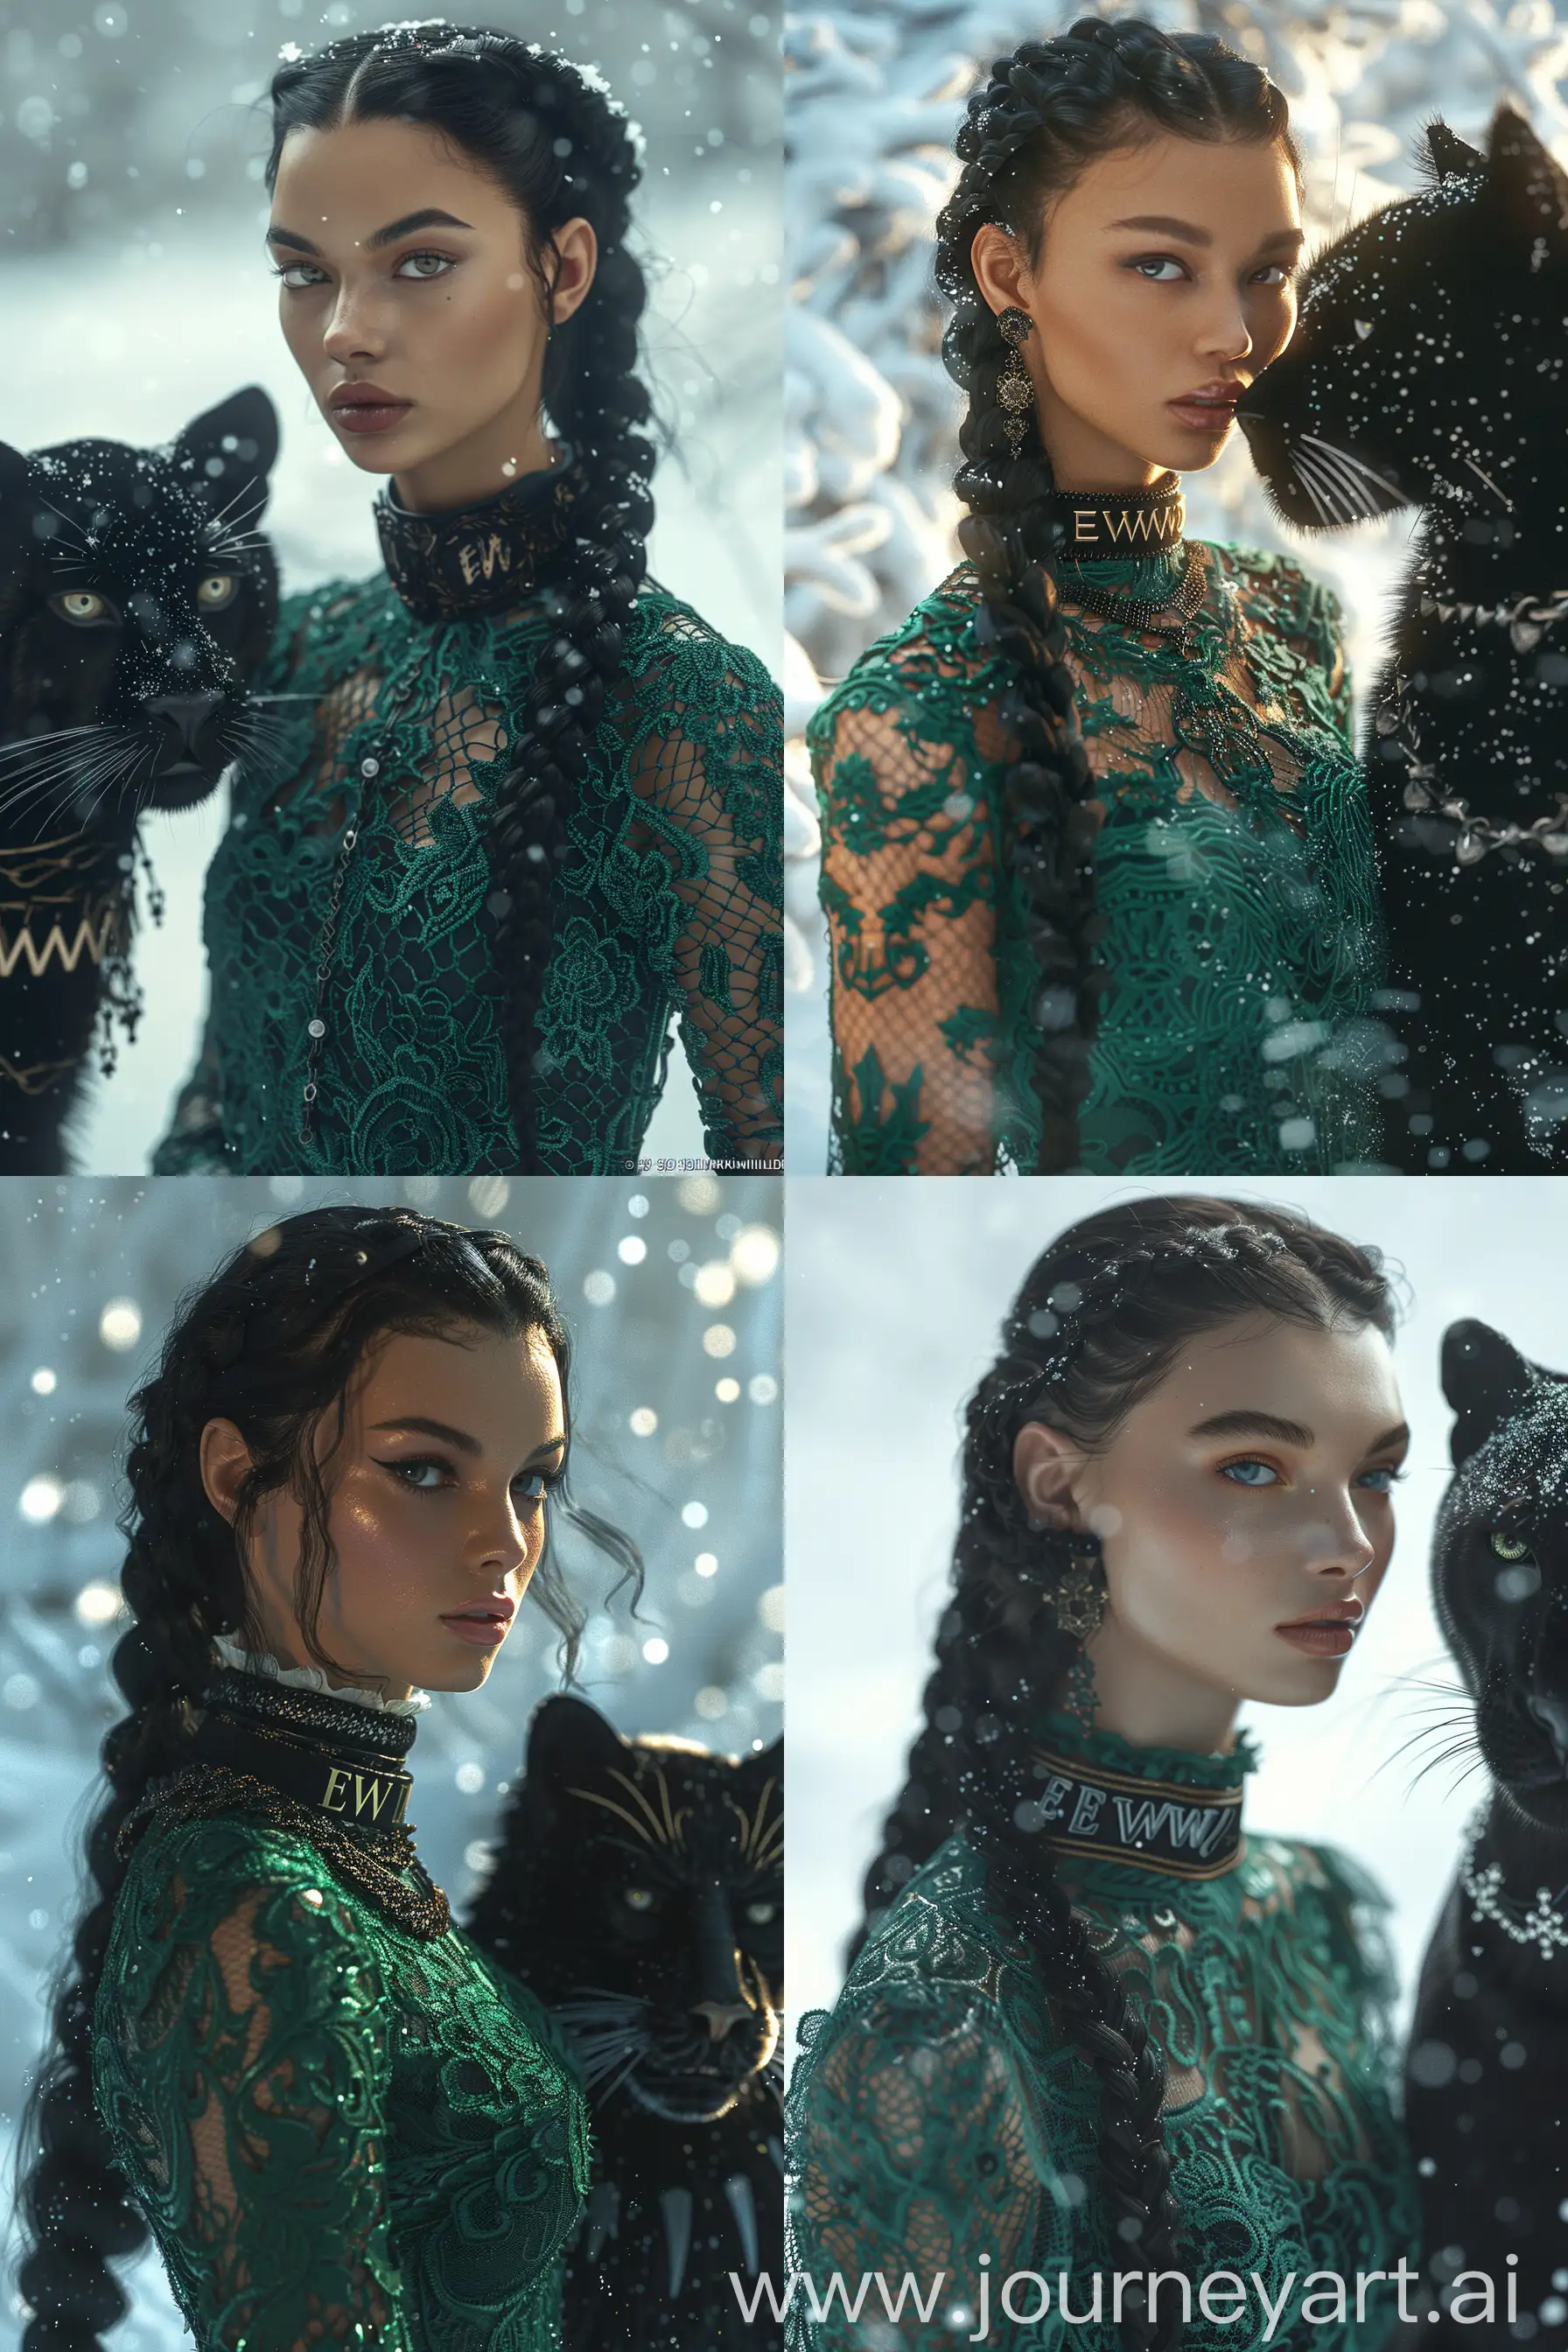 Elegant-Model-Girl-with-Long-Braided-Hair-and-EWW-Collar-Standing-by-Black-Panther-in-Emerald-Green-Lace-Dress-on-Snowy-Background